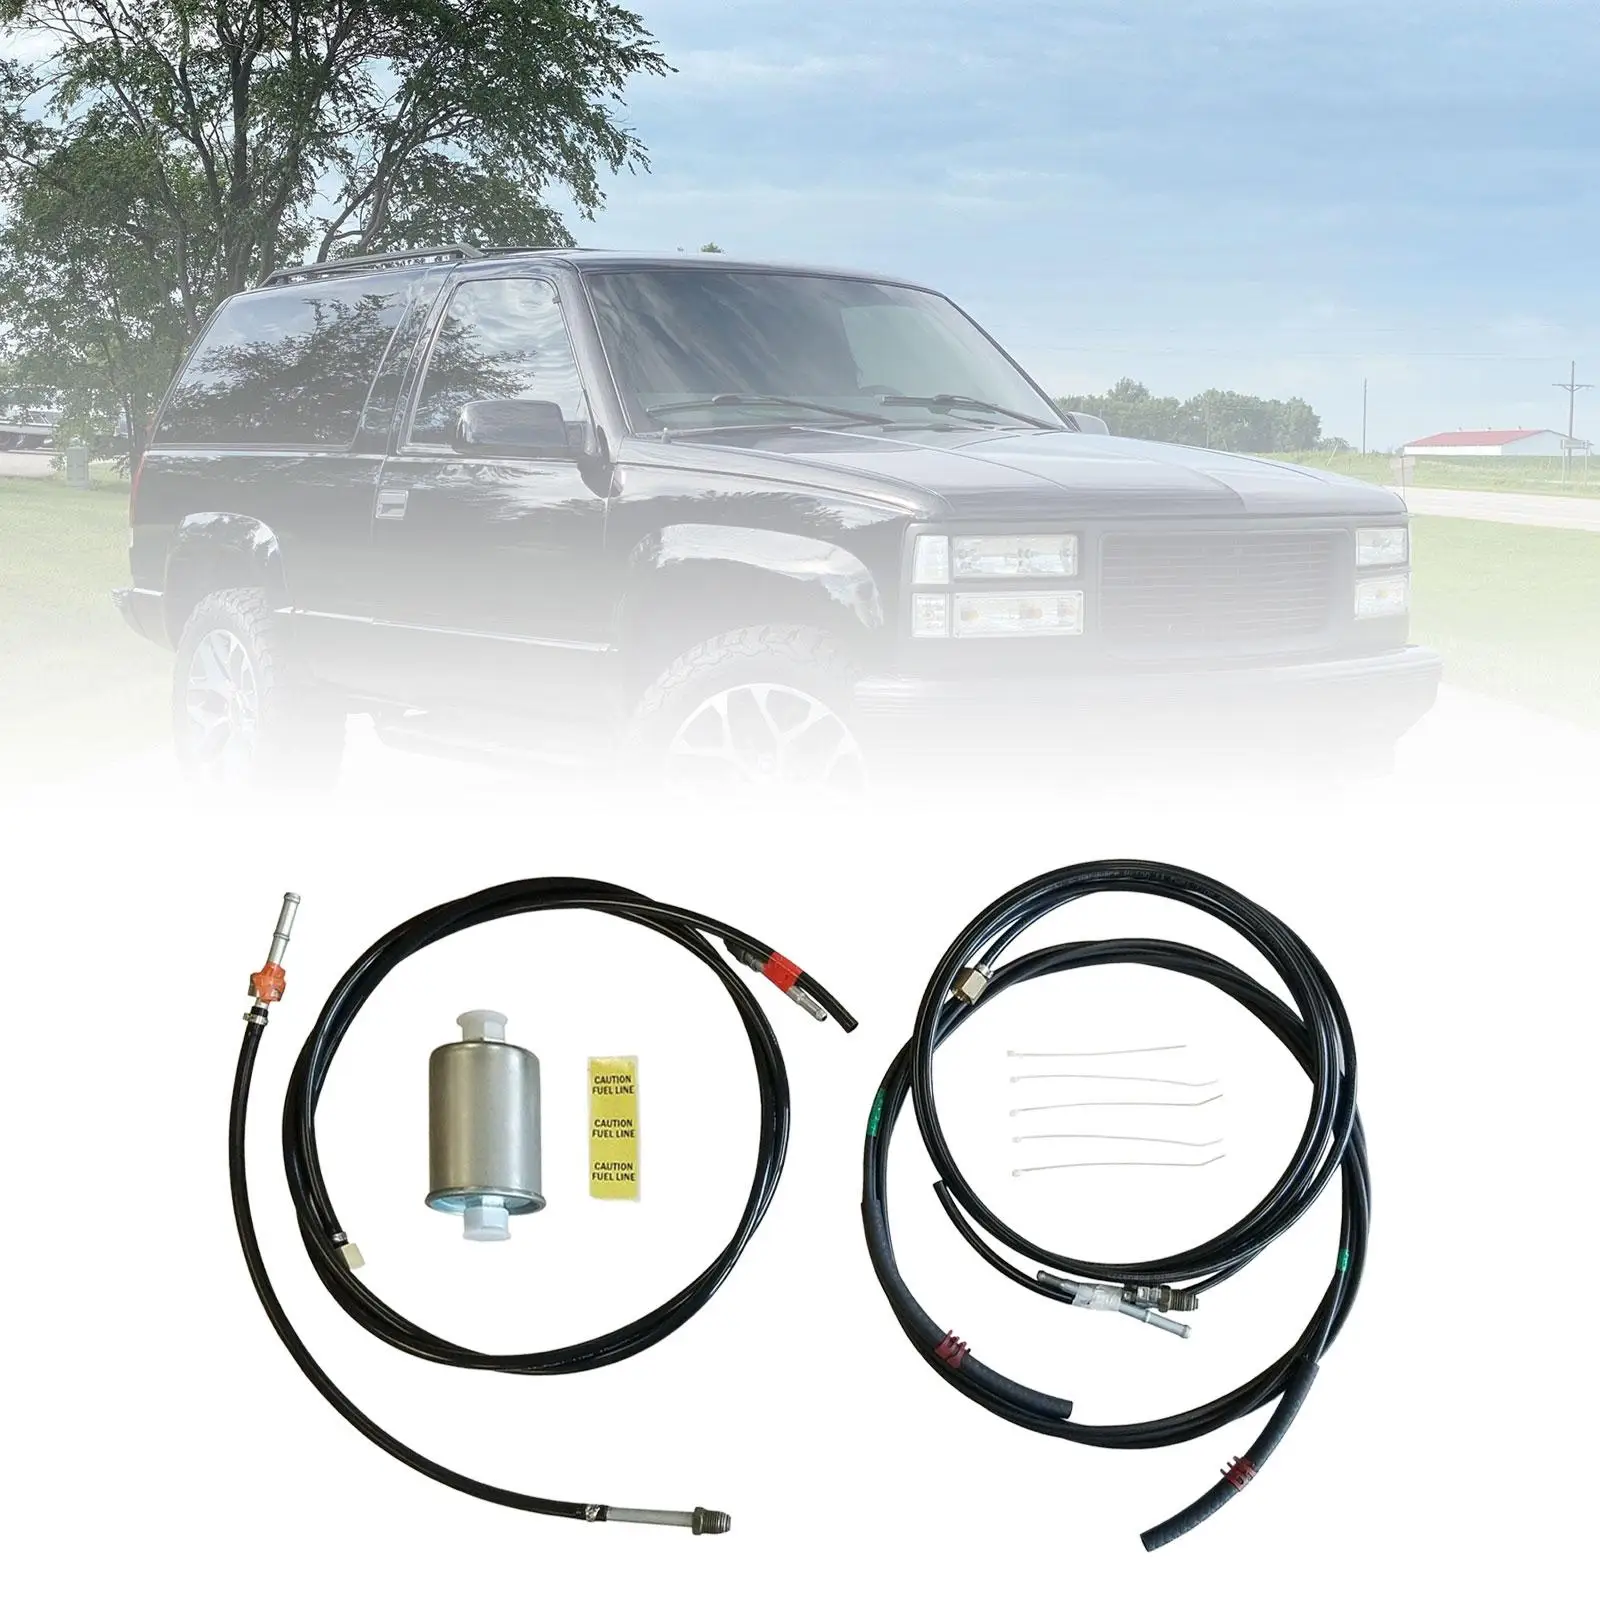 Fuel Line Kit Nfr0013 Durable Spare Parts Automotive Parts Replacement Tube Set for Chevrolet Easy Installation